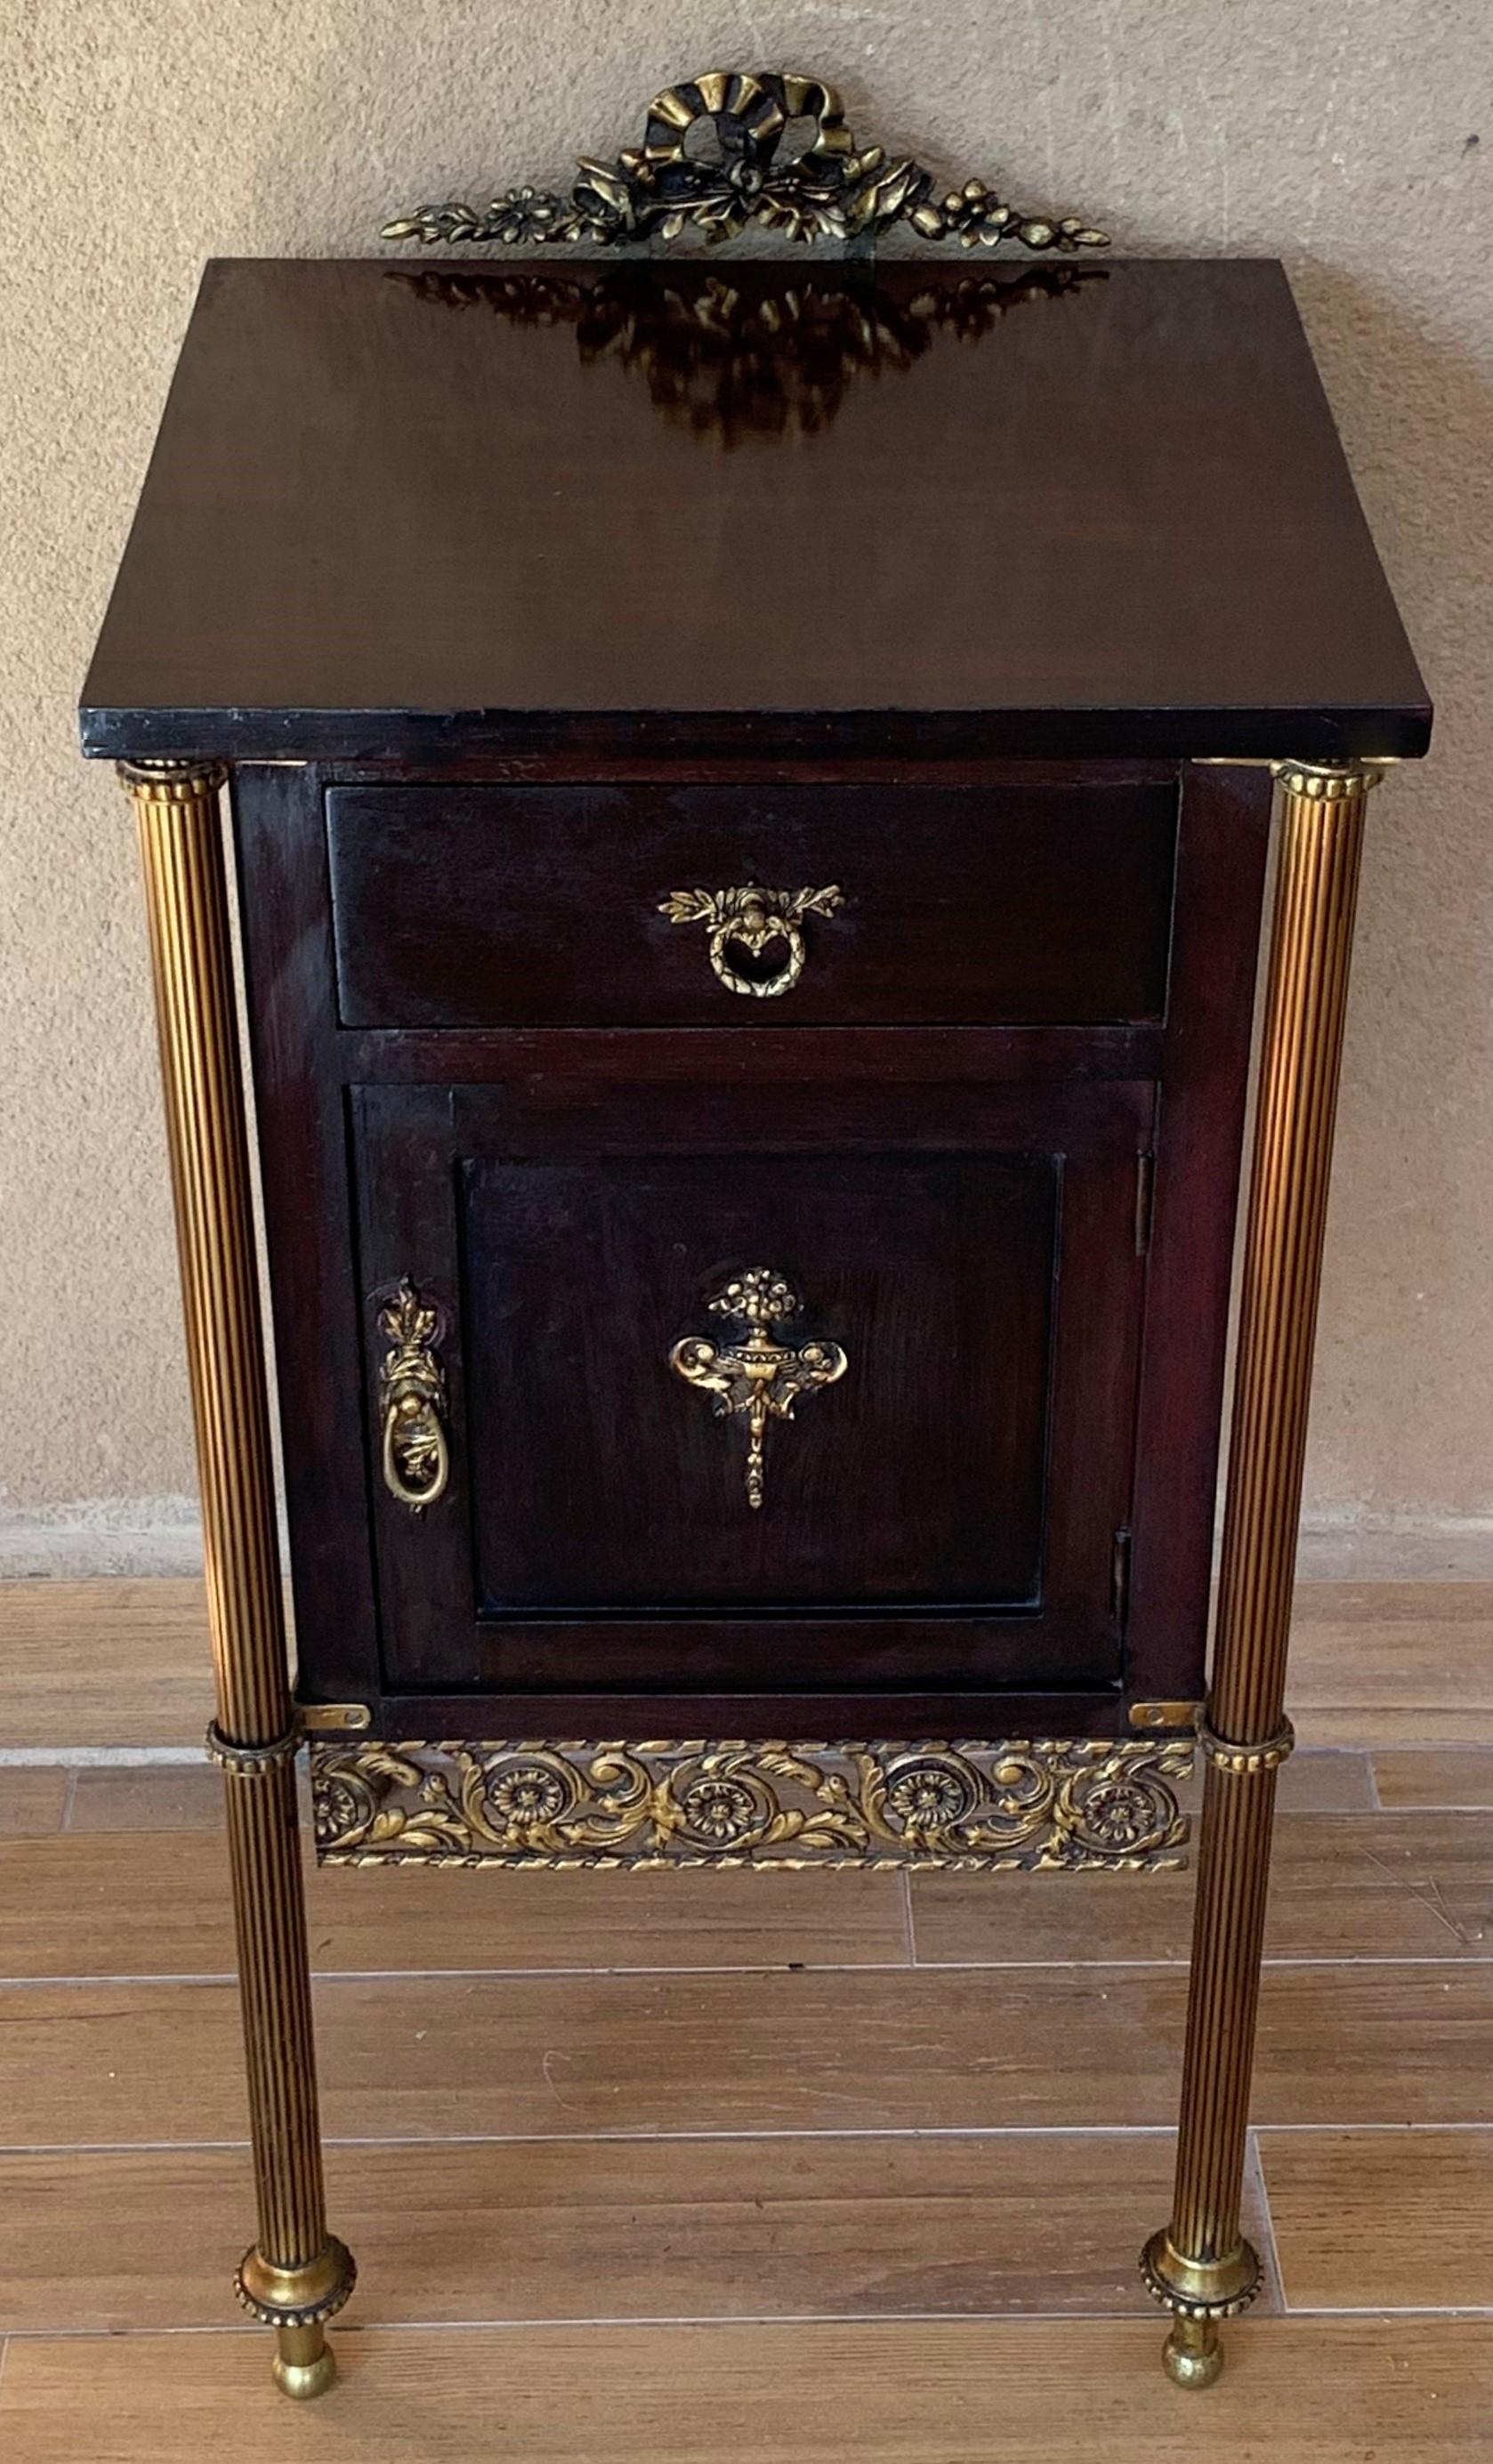 Elegant, timeless pair of French modern neoclassical ebonized mahogany with 1 drawer and 1 door. You can use like an end or side Tables. In style of Maison Jansen, each having brilliant top with crest and trimmed with a bronze gallery, circa 1940.